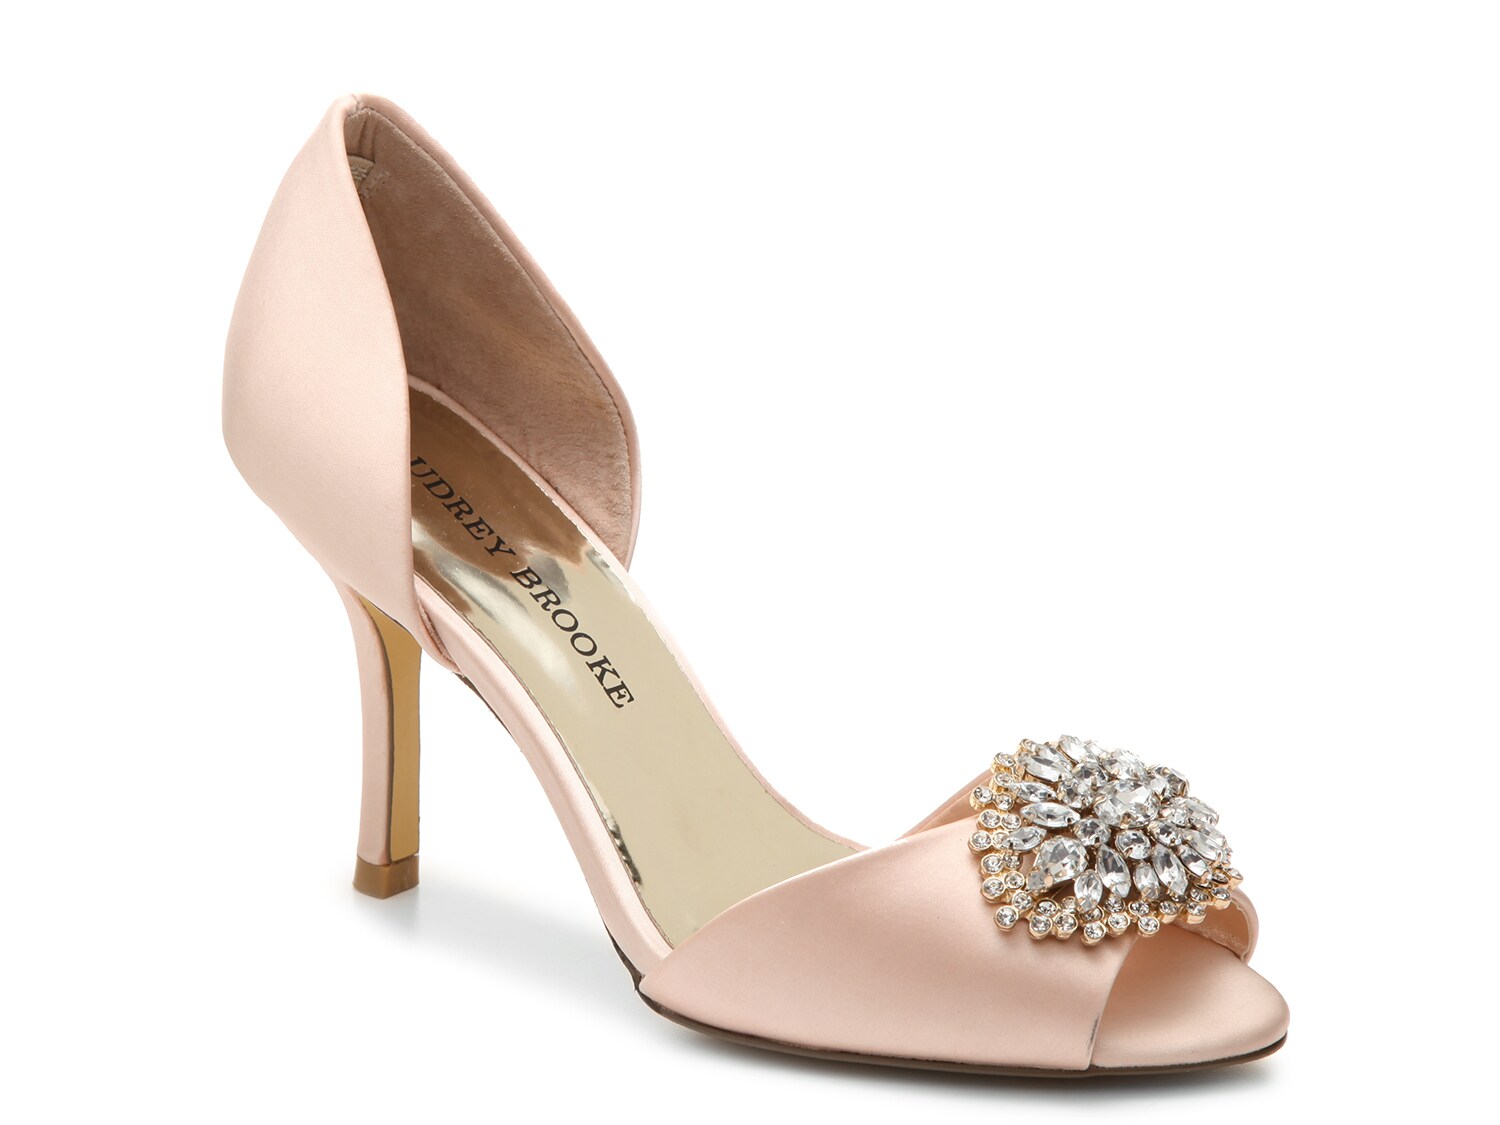 Audrey Brooke Taylor Pump - Free Shipping | DSW